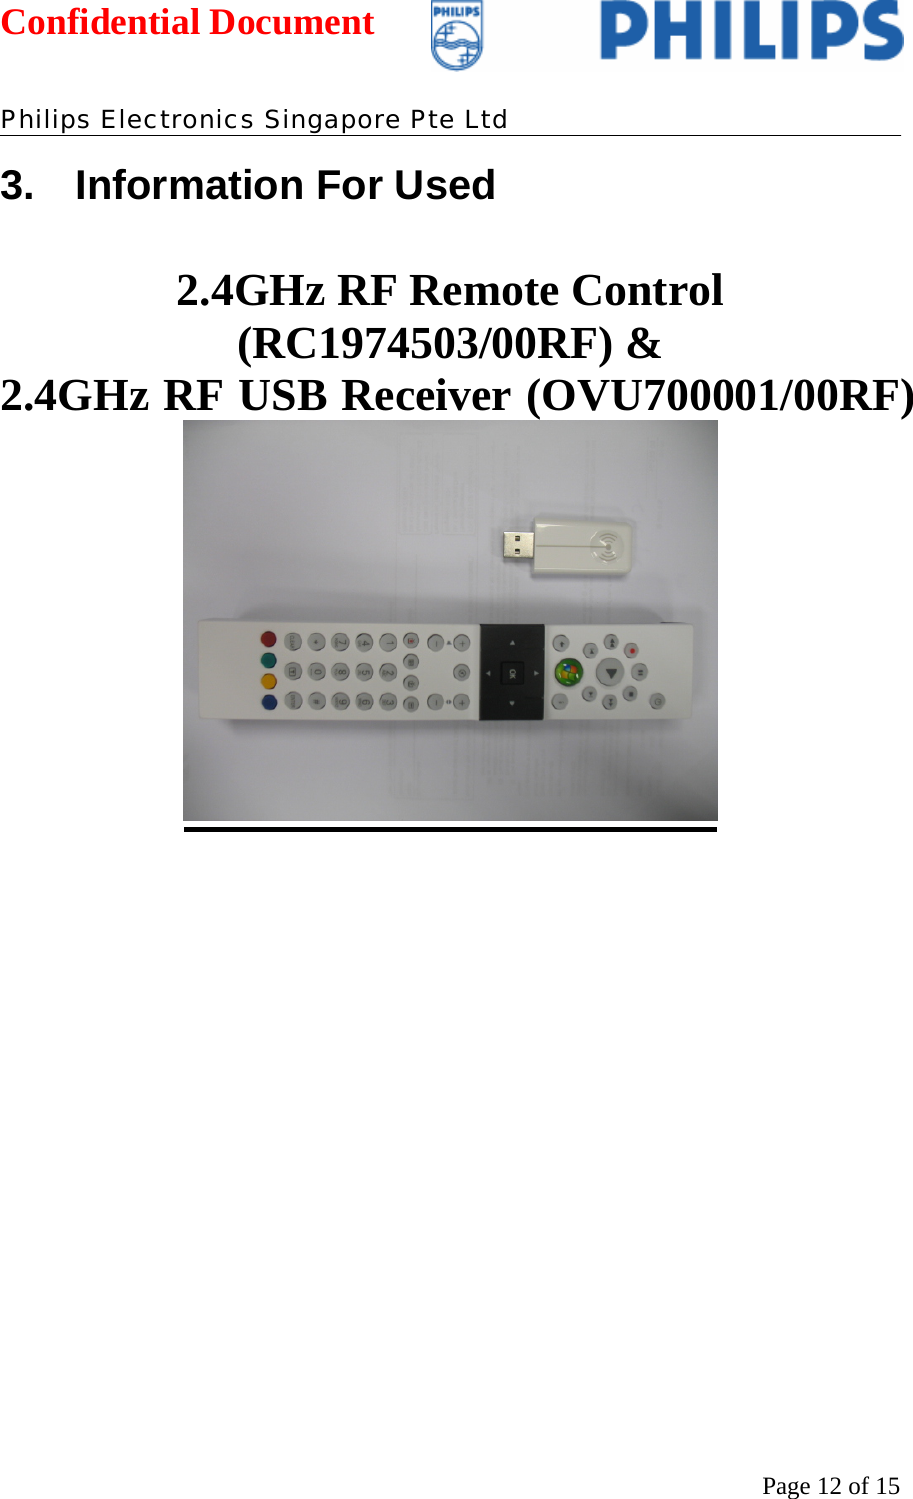 Confidential Document   Philips Electronics Singapore Pte Ltd  Page 12 of 153. Information For Used  2.4GHz RF Remote Control (RC1974503/00RF) &amp;  2.4GHz RF USB Receiver (OVU700001/00RF)           